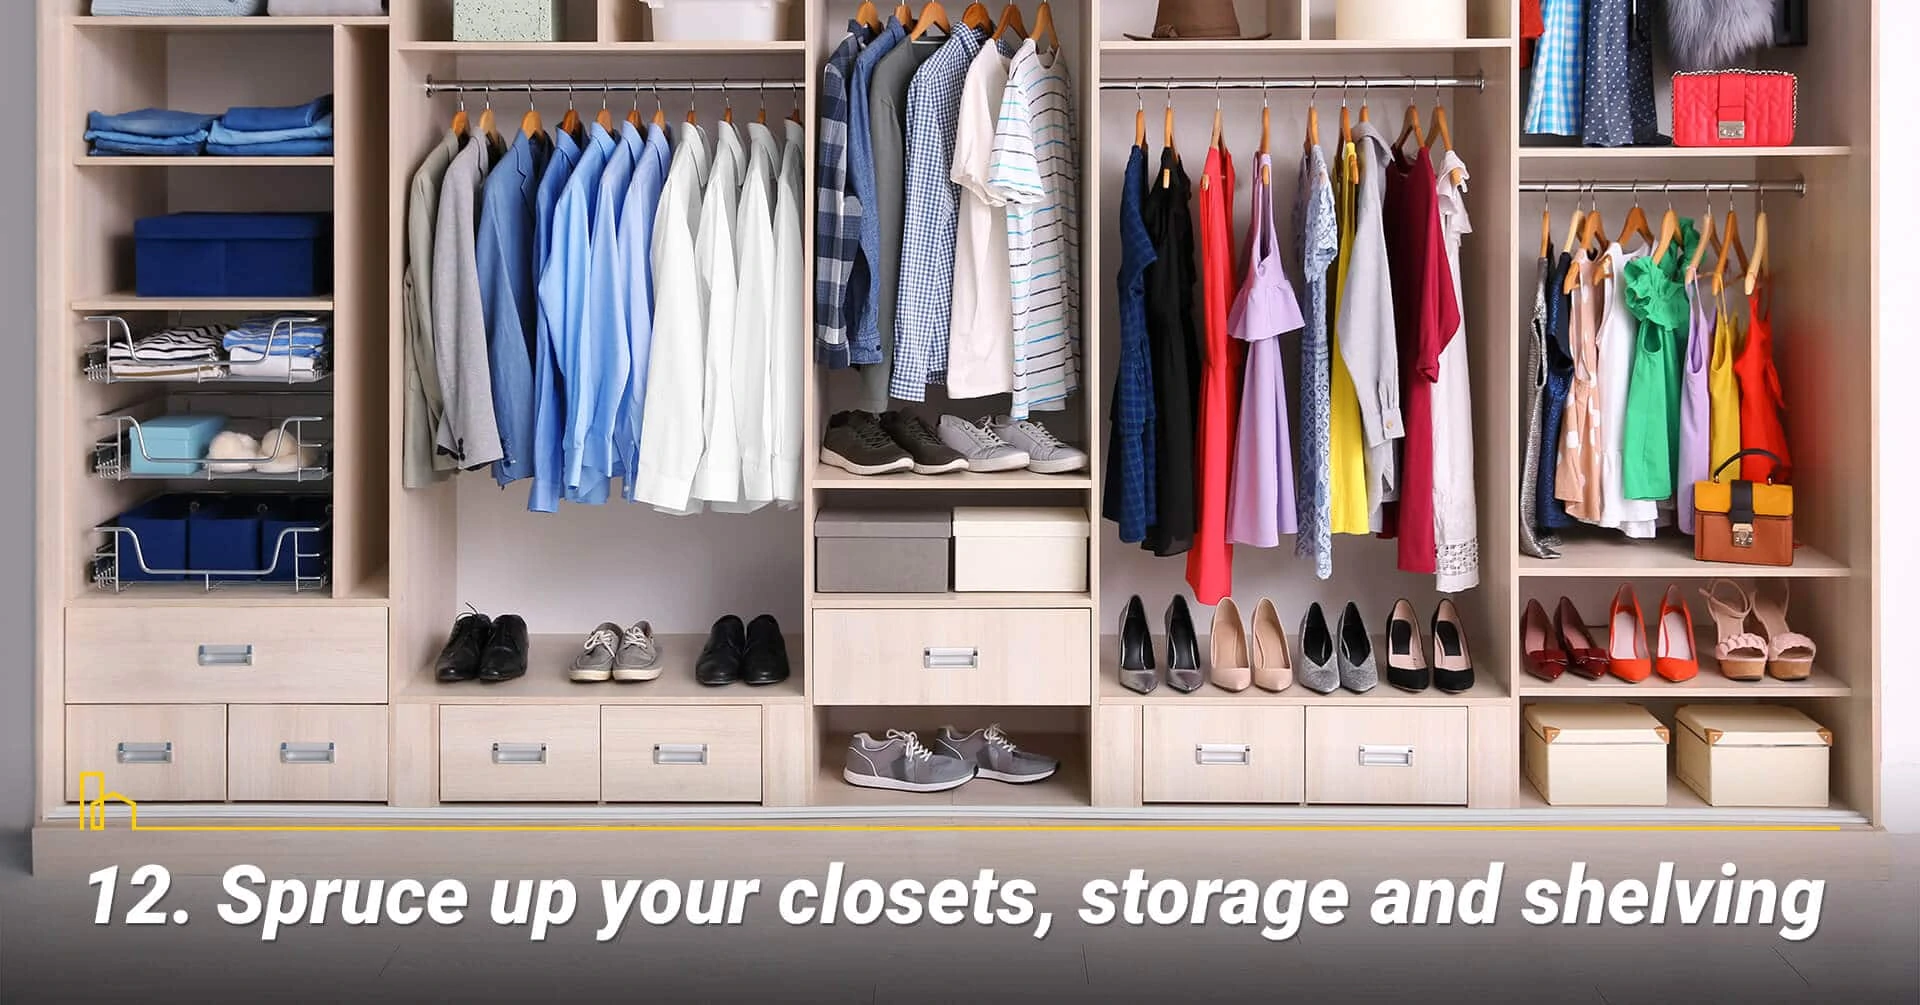 Spruce up your closets, storage and shelving, organize the closets